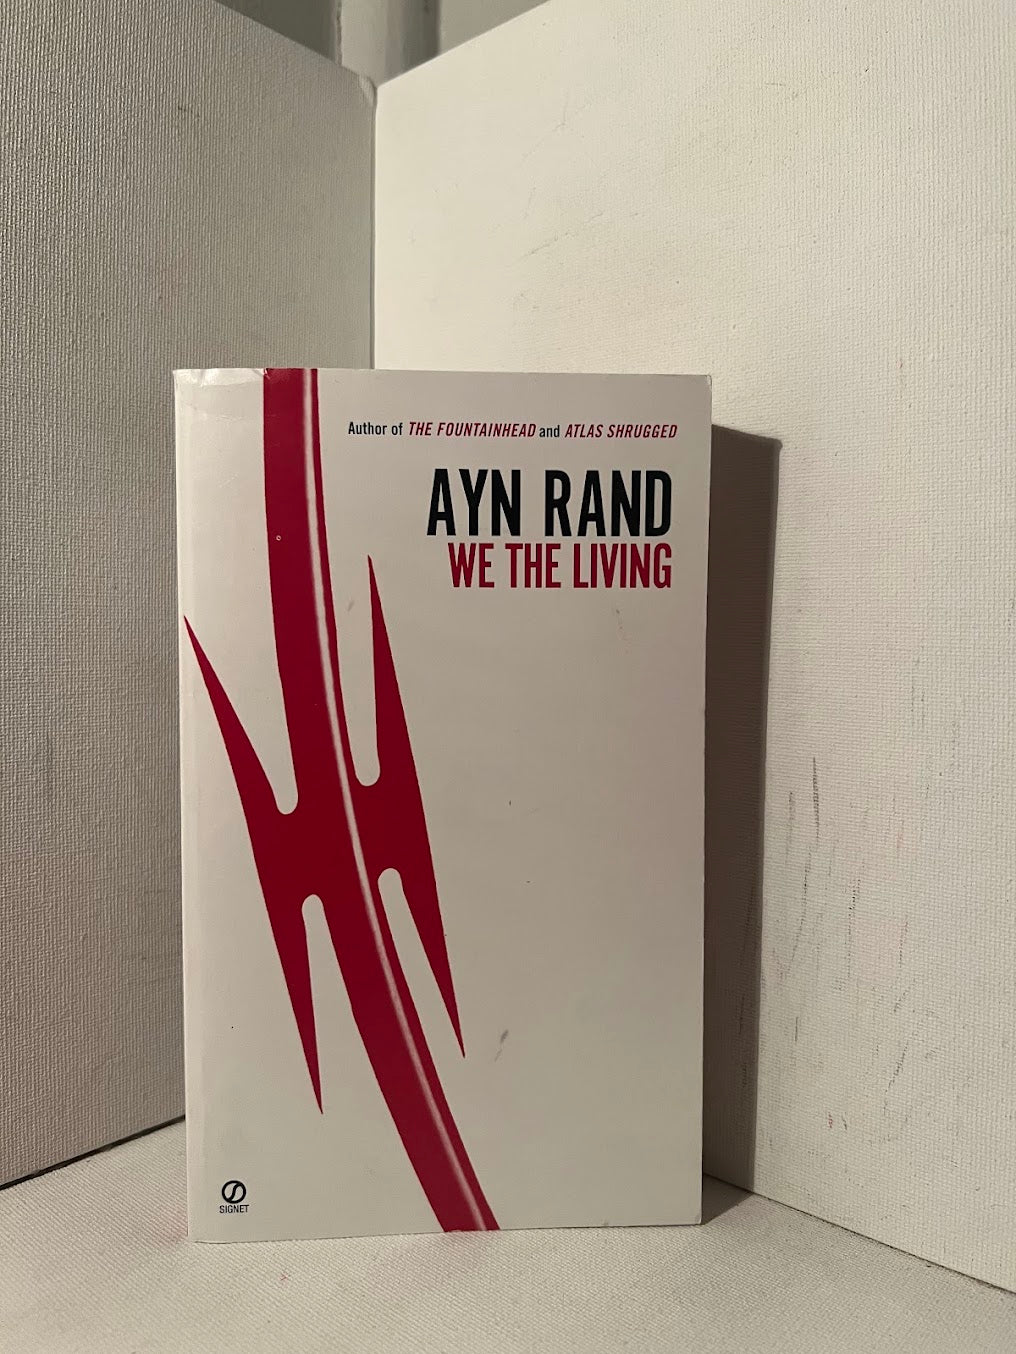 We the Living by Ayn Rand